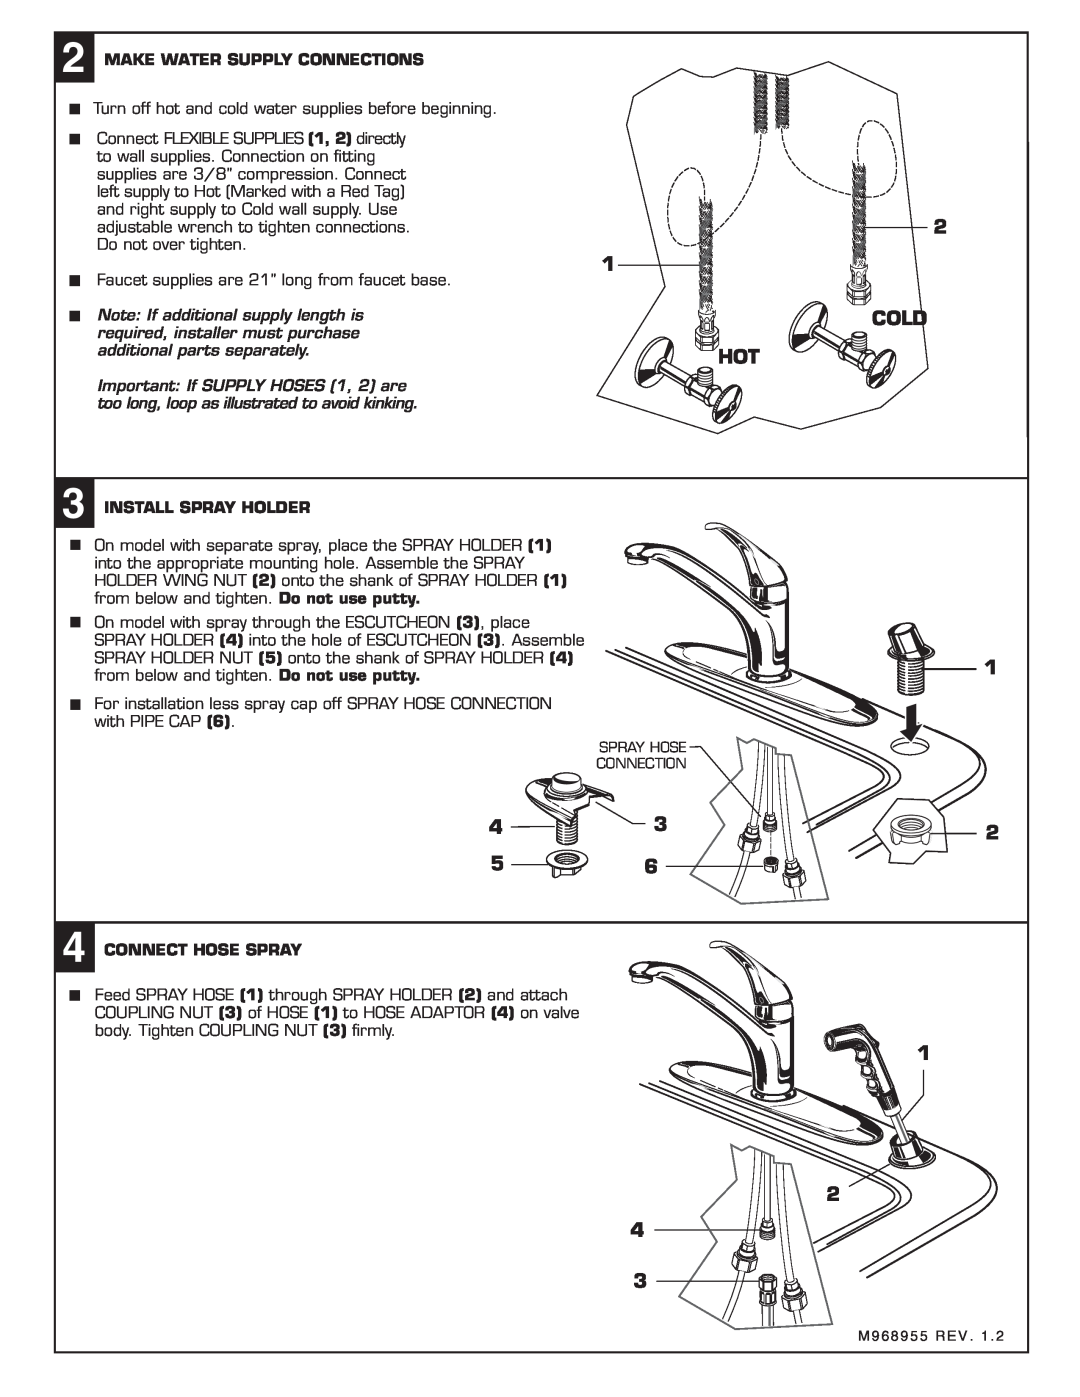 American Standard 4400 SERIES installation instructions Connect Hose Spray, Spray Hose Connection, M968955 REV 